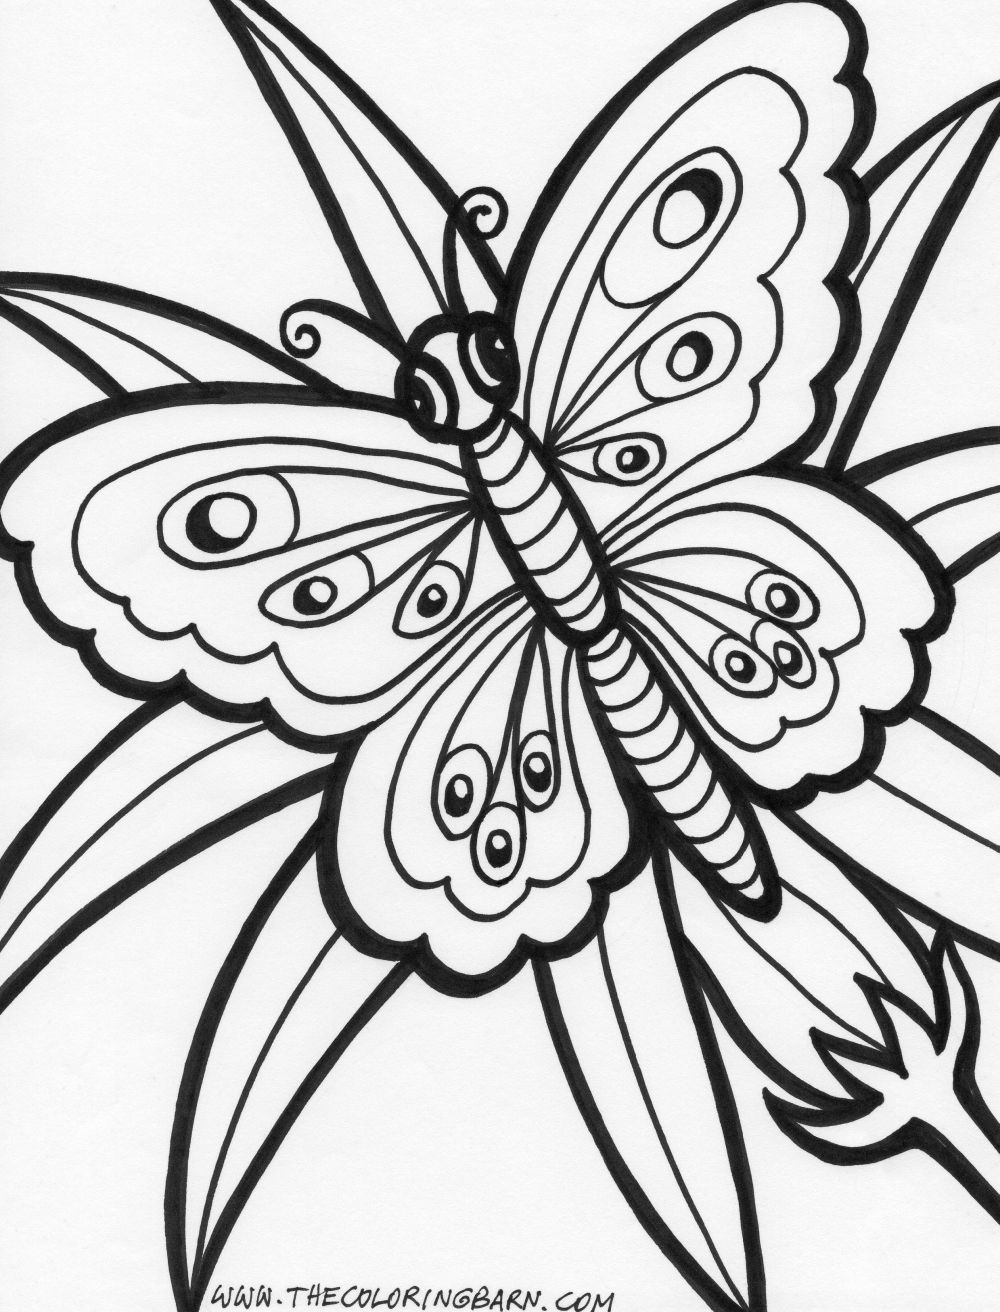 Coloring Flower Pictures. flower coloring pages kids flower ...